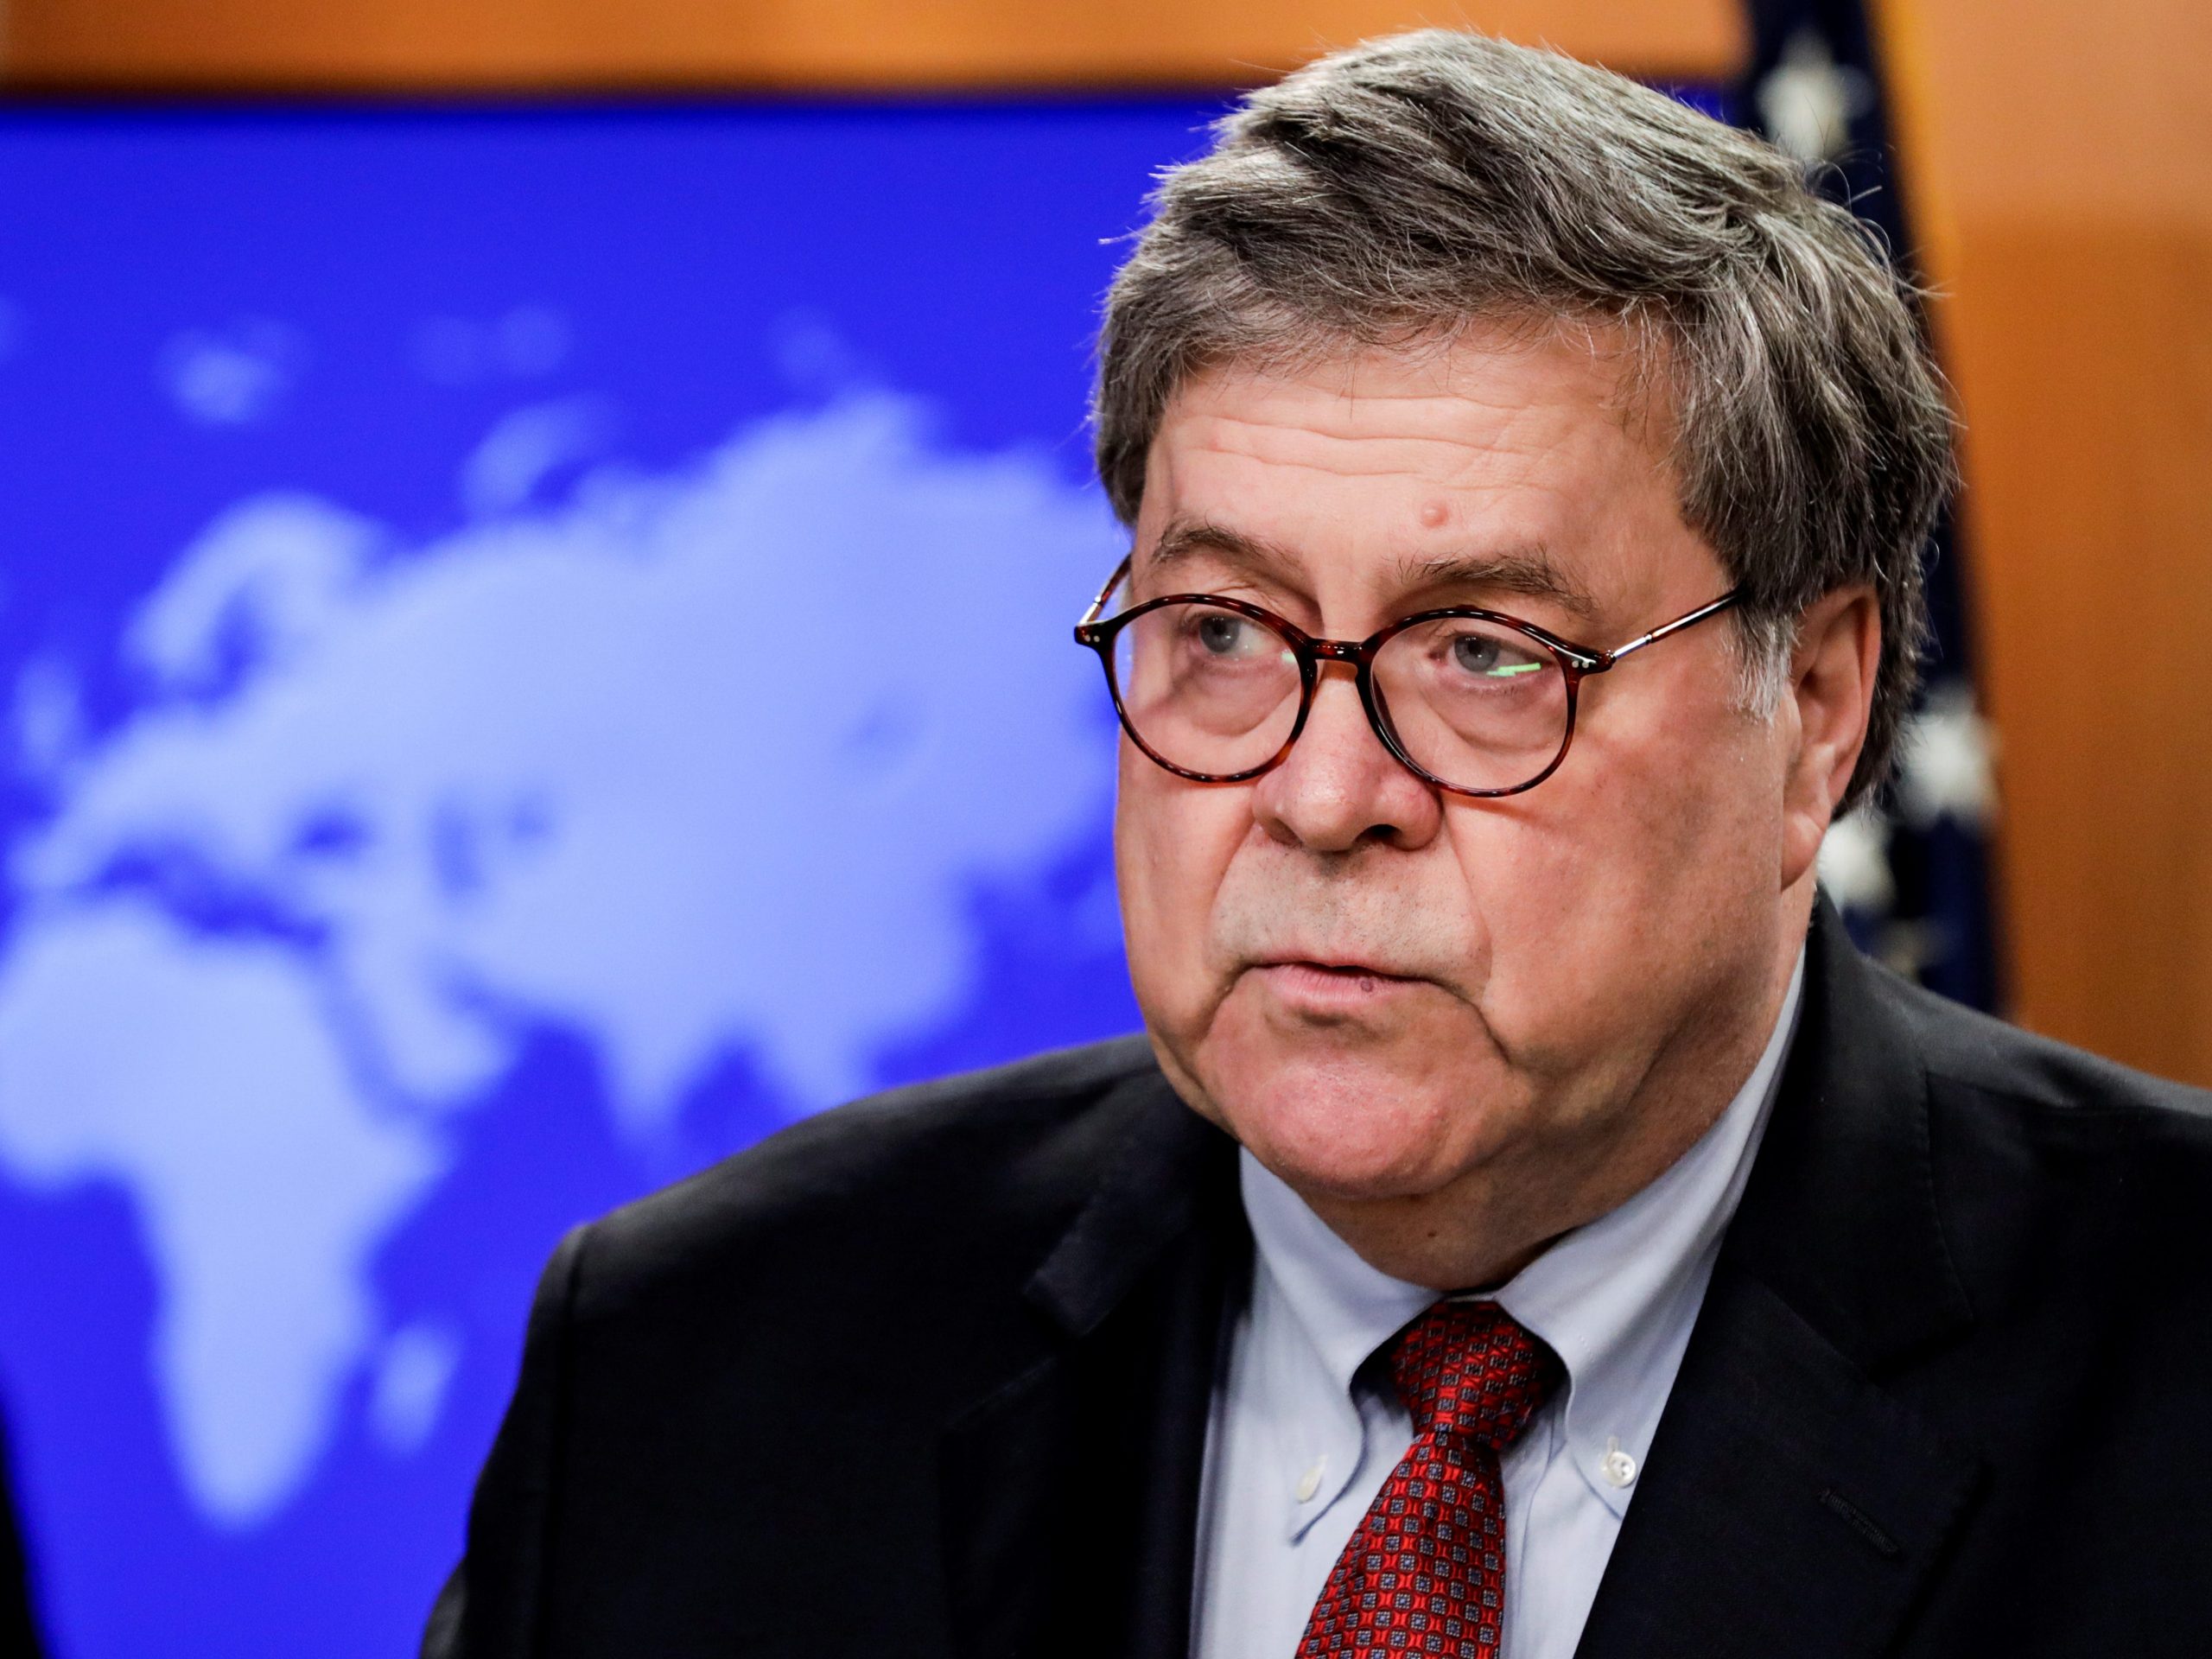 FILE PHOTO - U.S. Attorney General William Barr discusses a Trump administration executive order on the International Criminal Court during a joint news conference at the State Department in Washington, U.S., June 11, 2020. REUTERS/Yuri Gripas/Pool